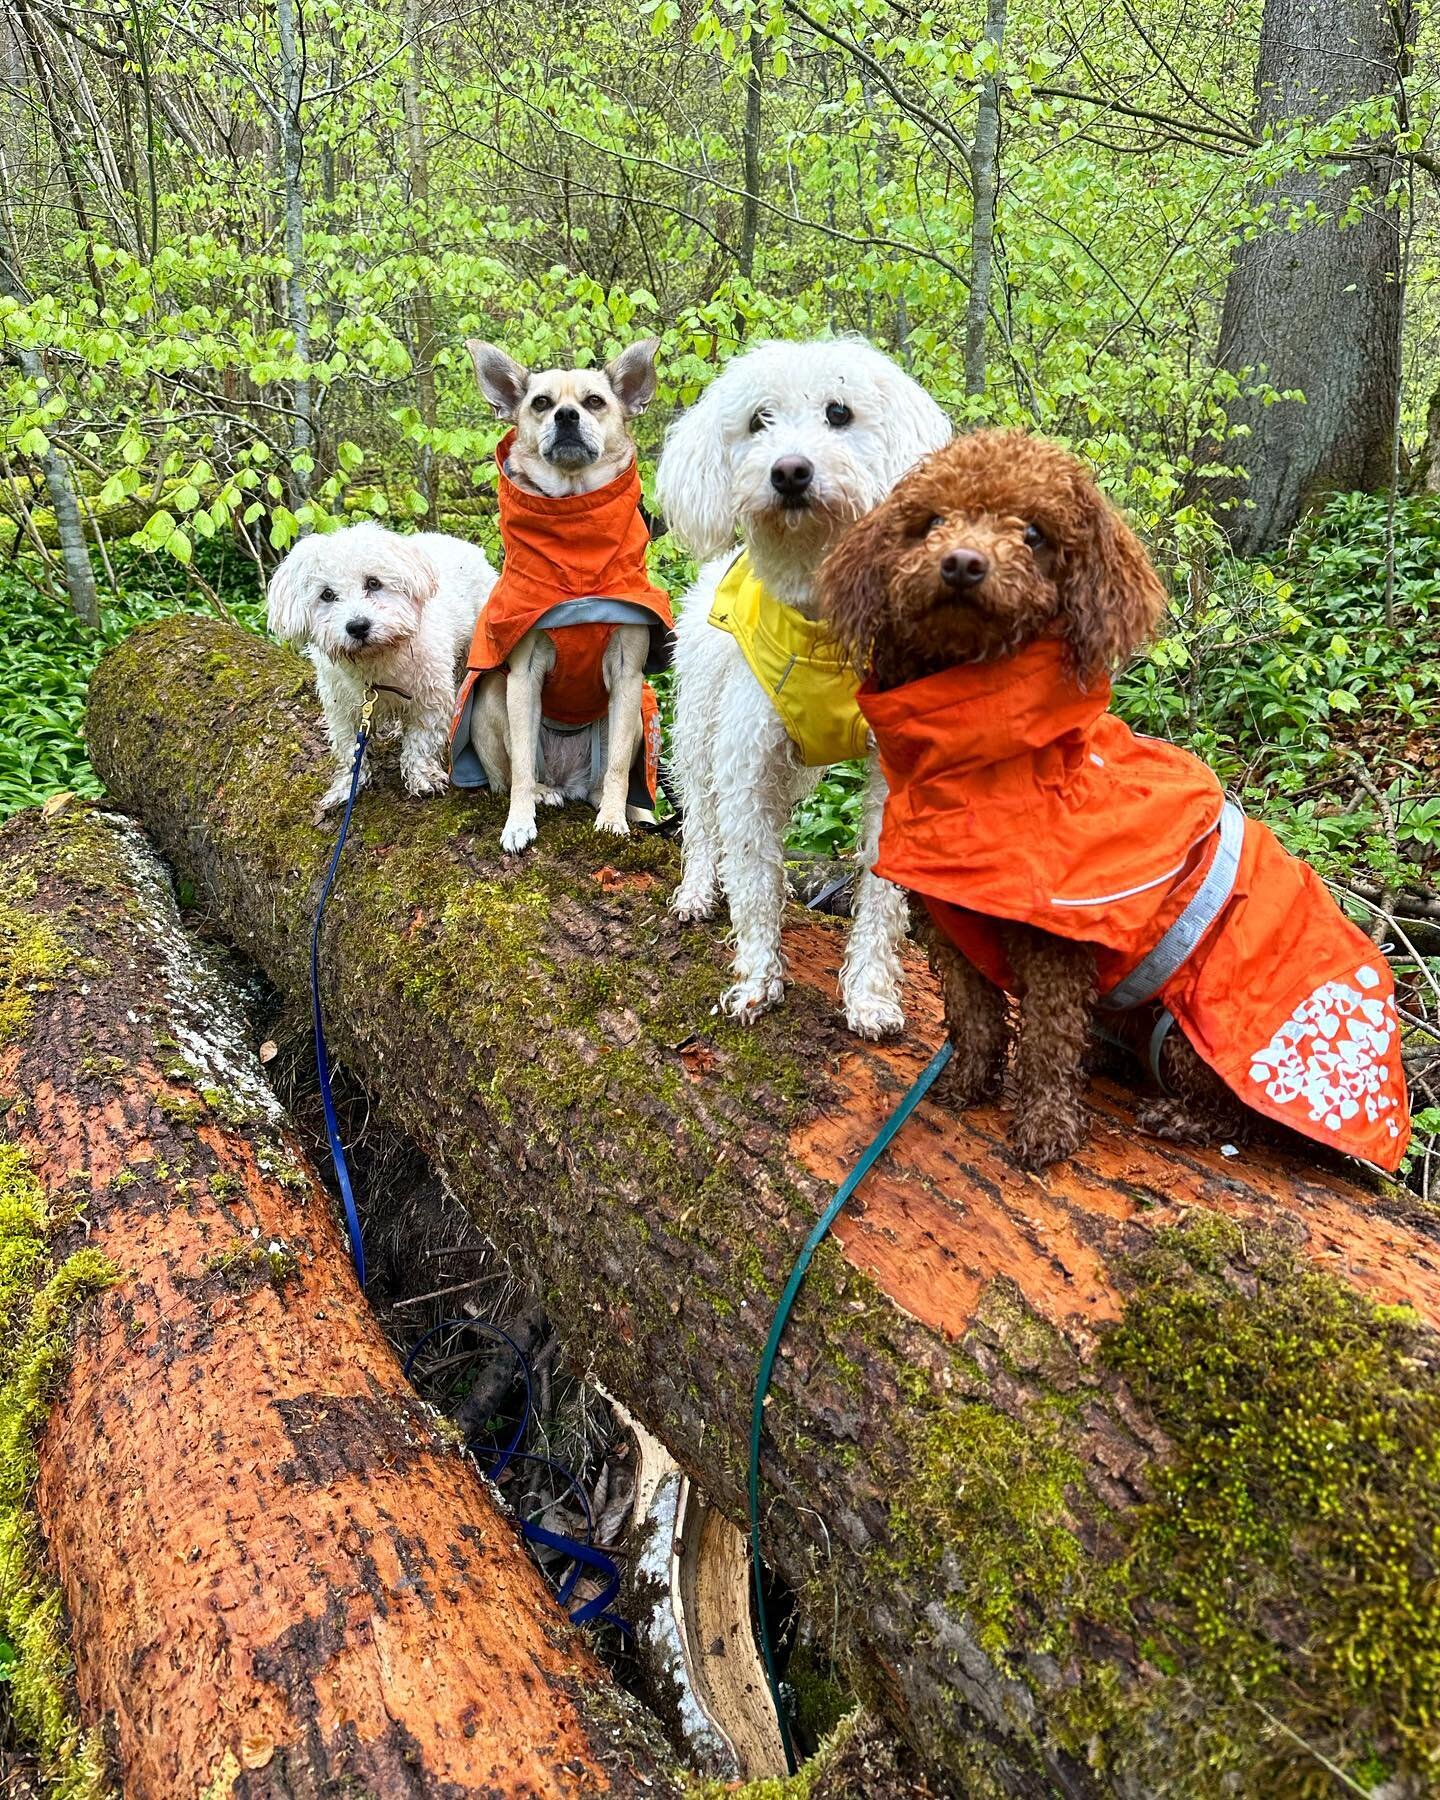 A DAYCARE QUESTION ABOUT RAINCOATS WE OFTEN HEAR:
'do i have to bring a raincoat to daycare for my dog?' the answer is, as so often, that it is only necessary if it is requested by you. if you give us one for your fur friend, we will put it on if it 